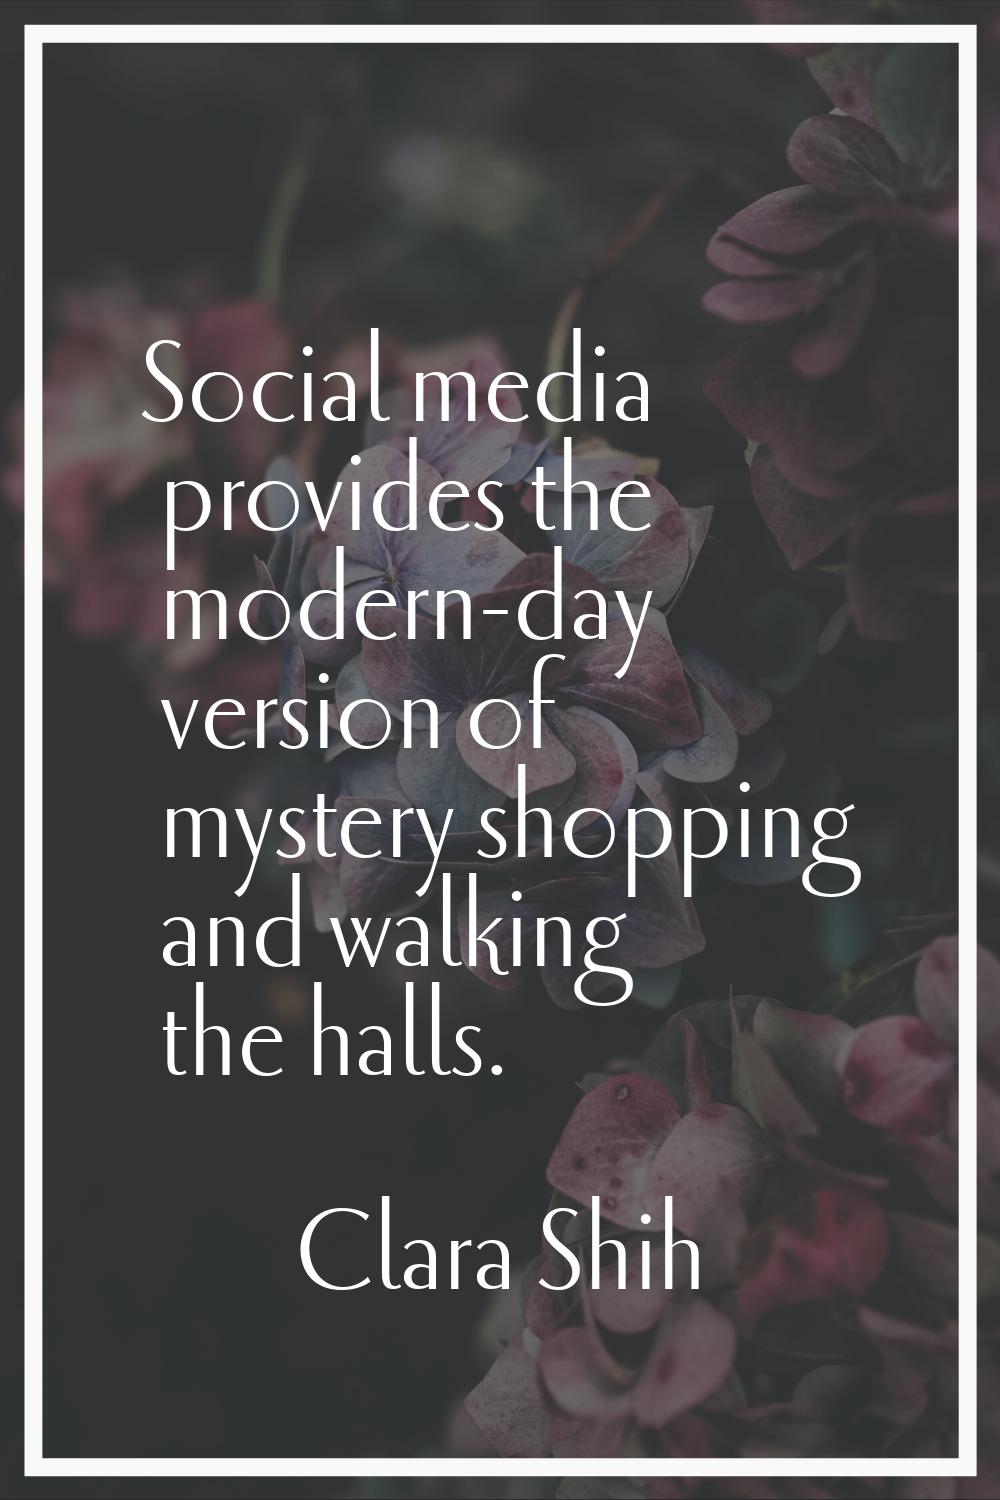 Social media provides the modern-day version of mystery shopping and walking the halls.